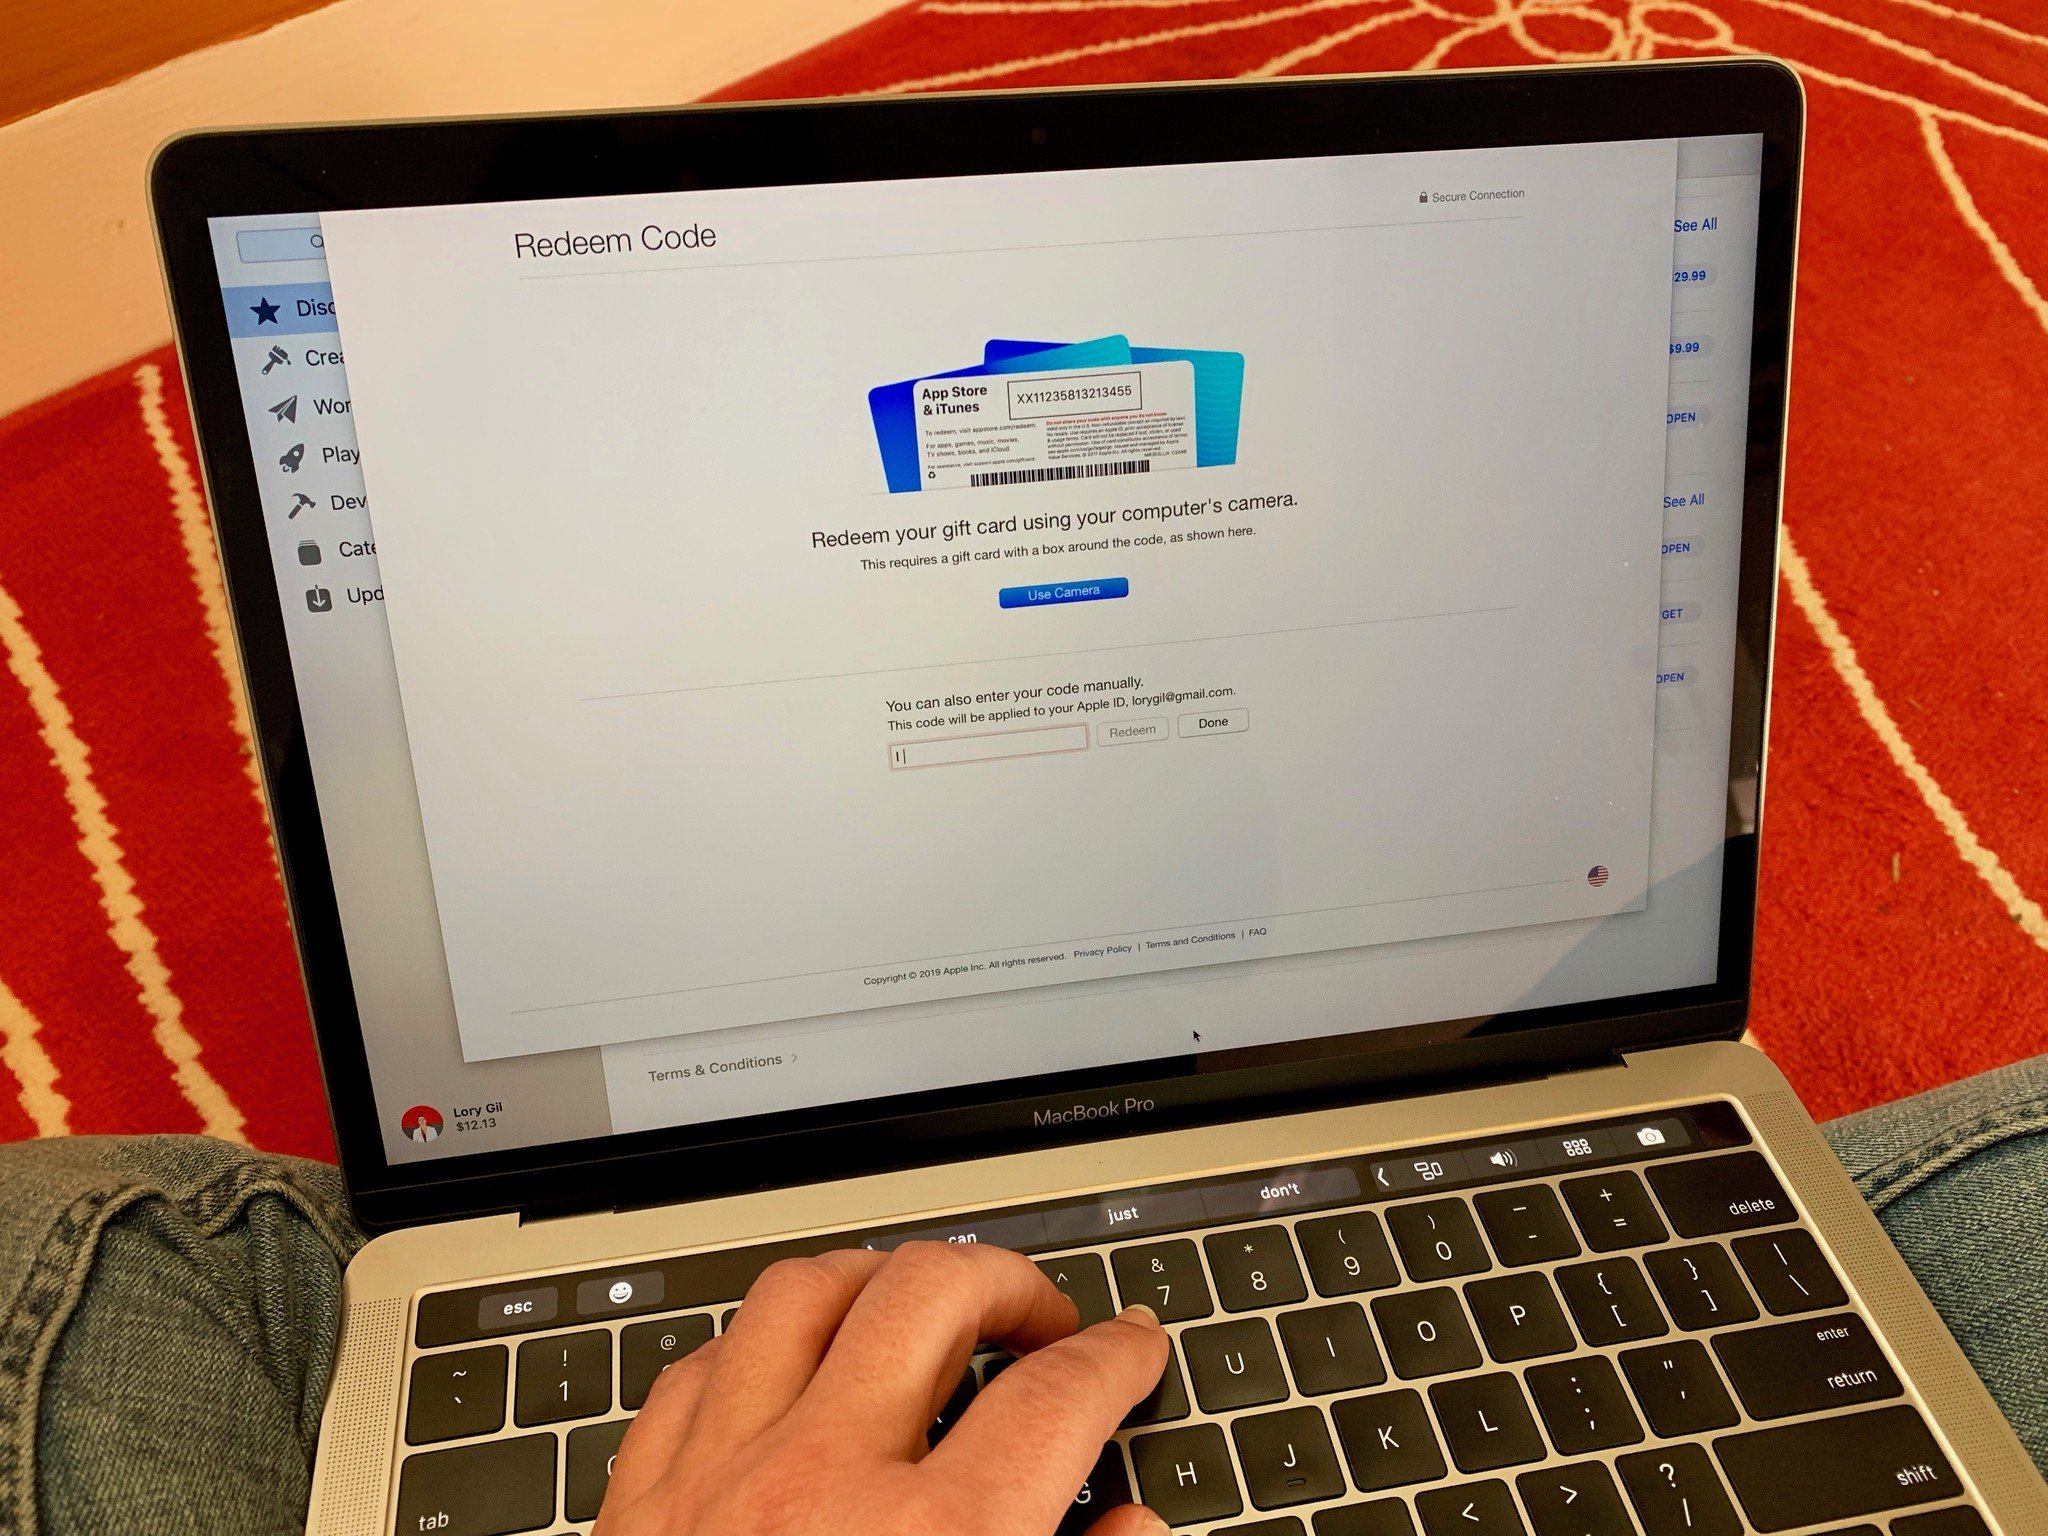 How to redeem a gift card or promo code in the Mac App